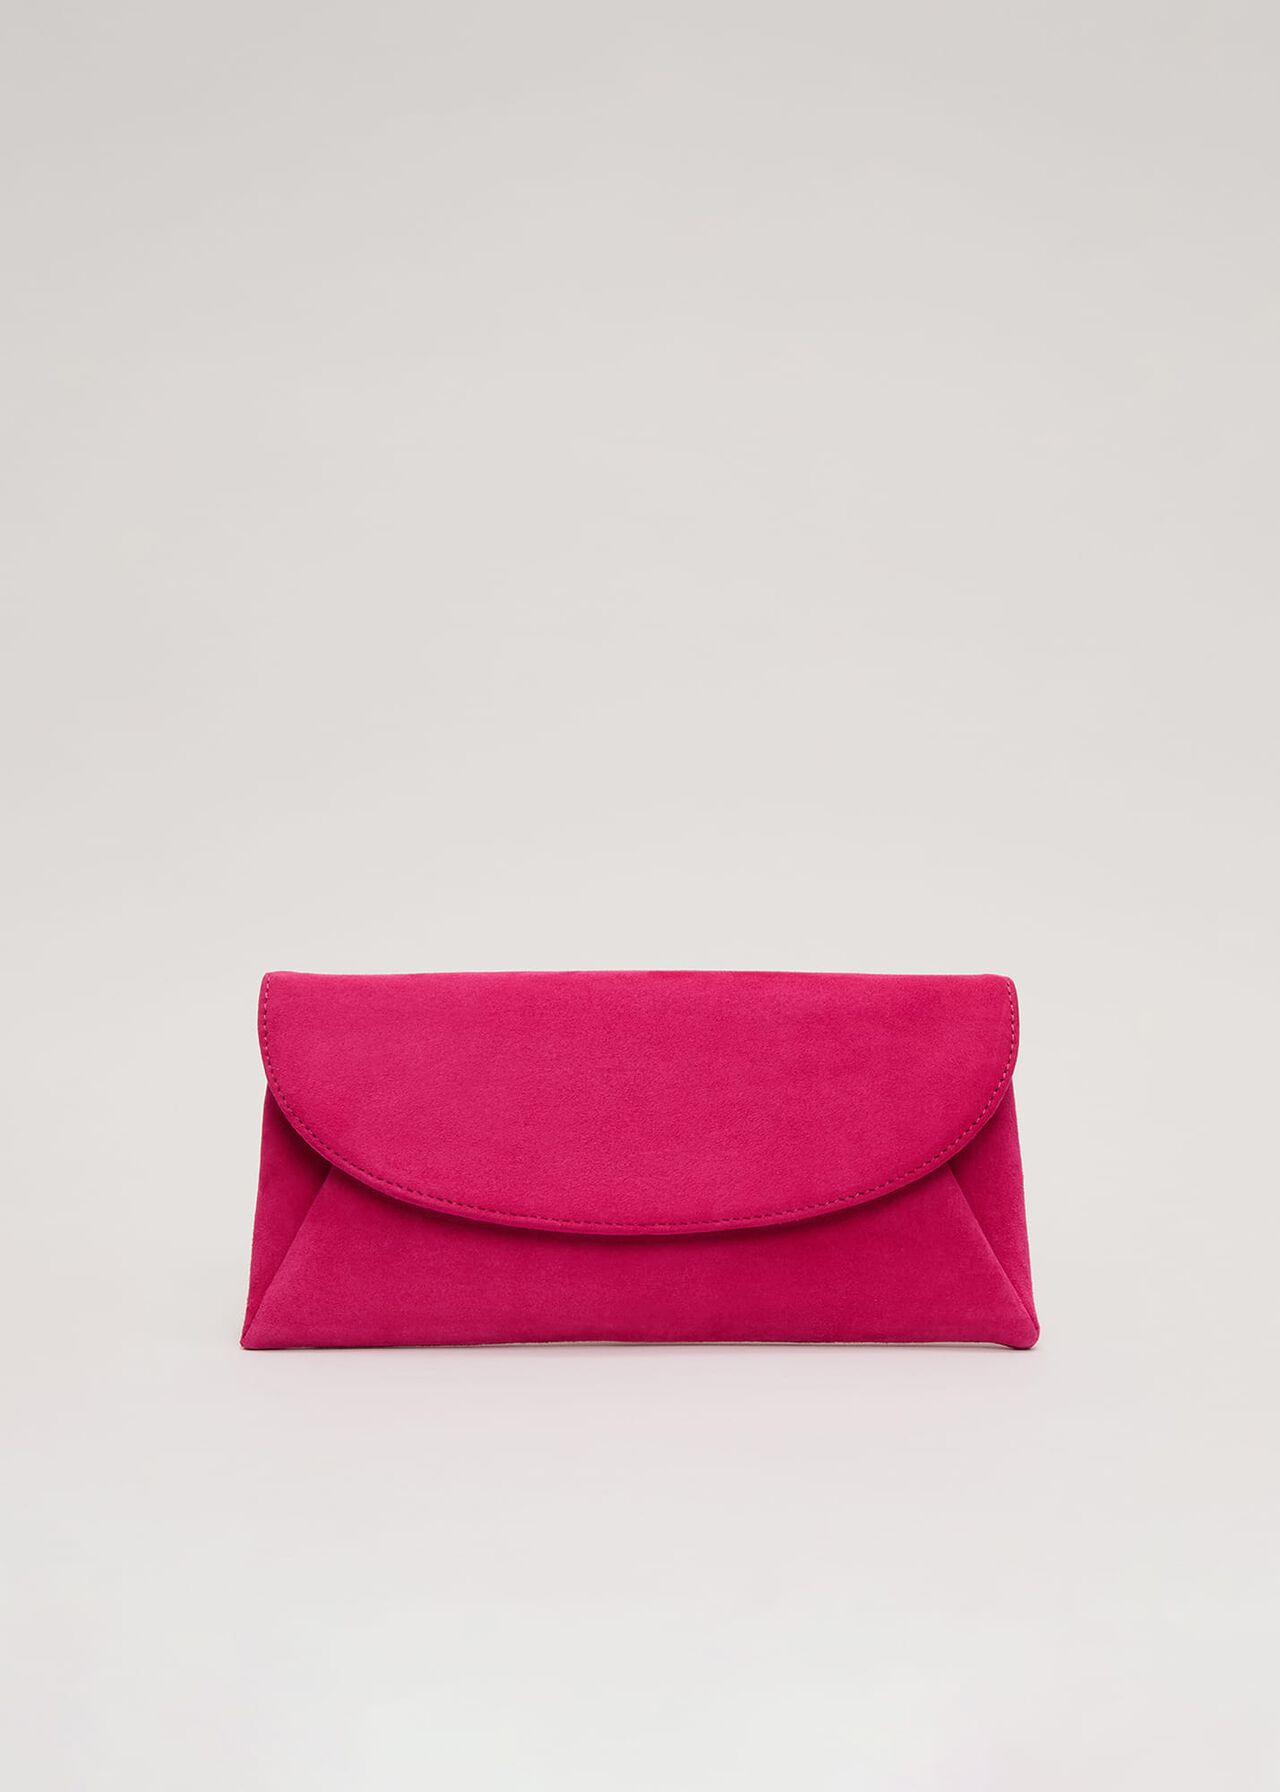 Suede Clutch Bag | Phase Eight UK